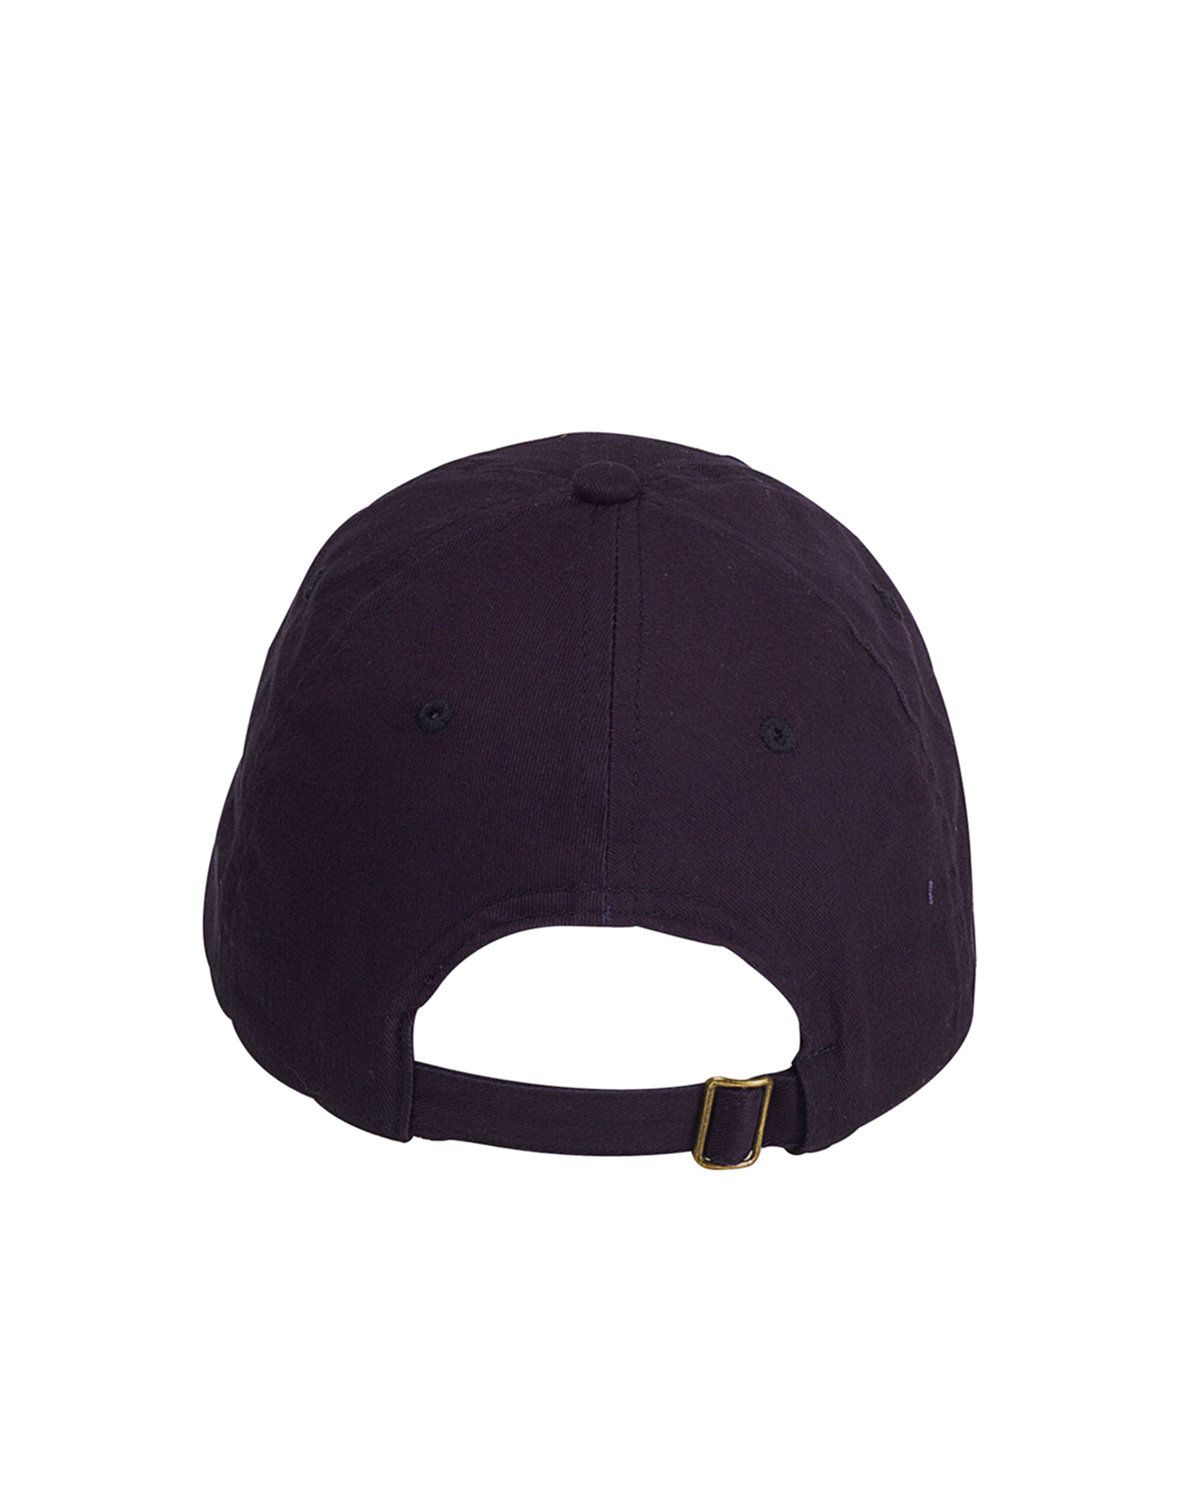 'Big Accessories BX001Y Youth 6 Panel Brushed Twill Unstructured Cap'